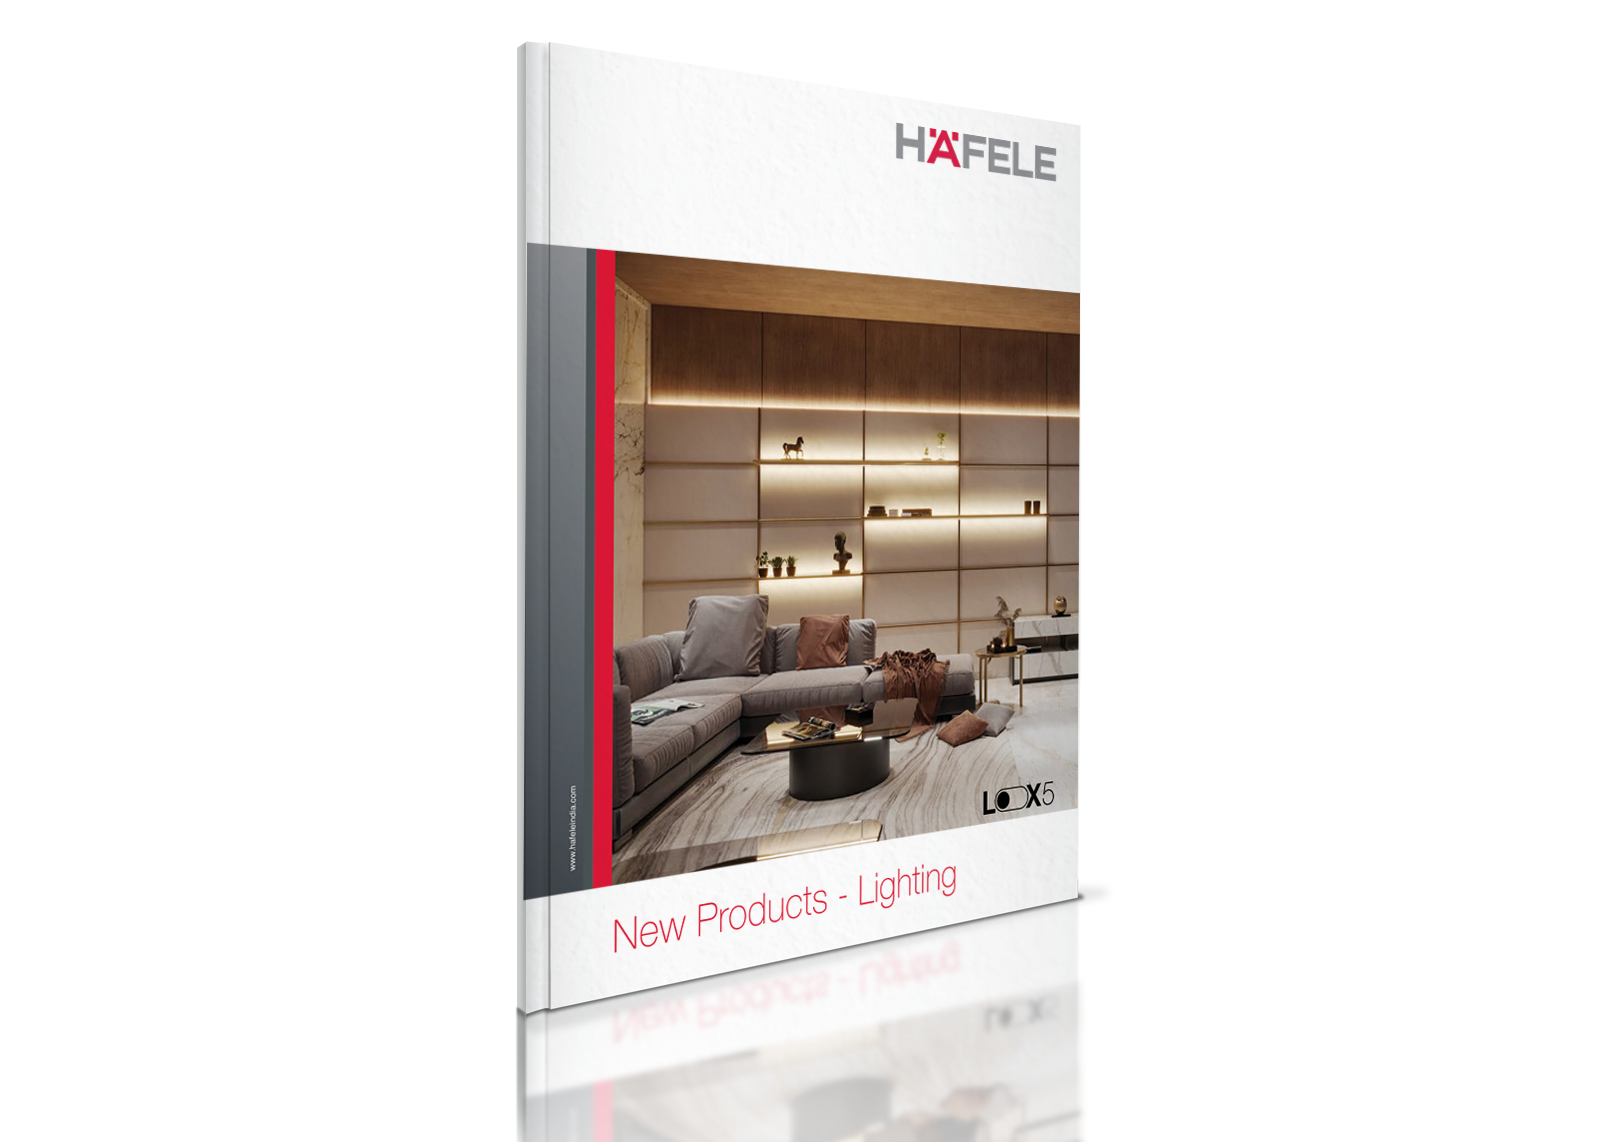 New Products - Lighting